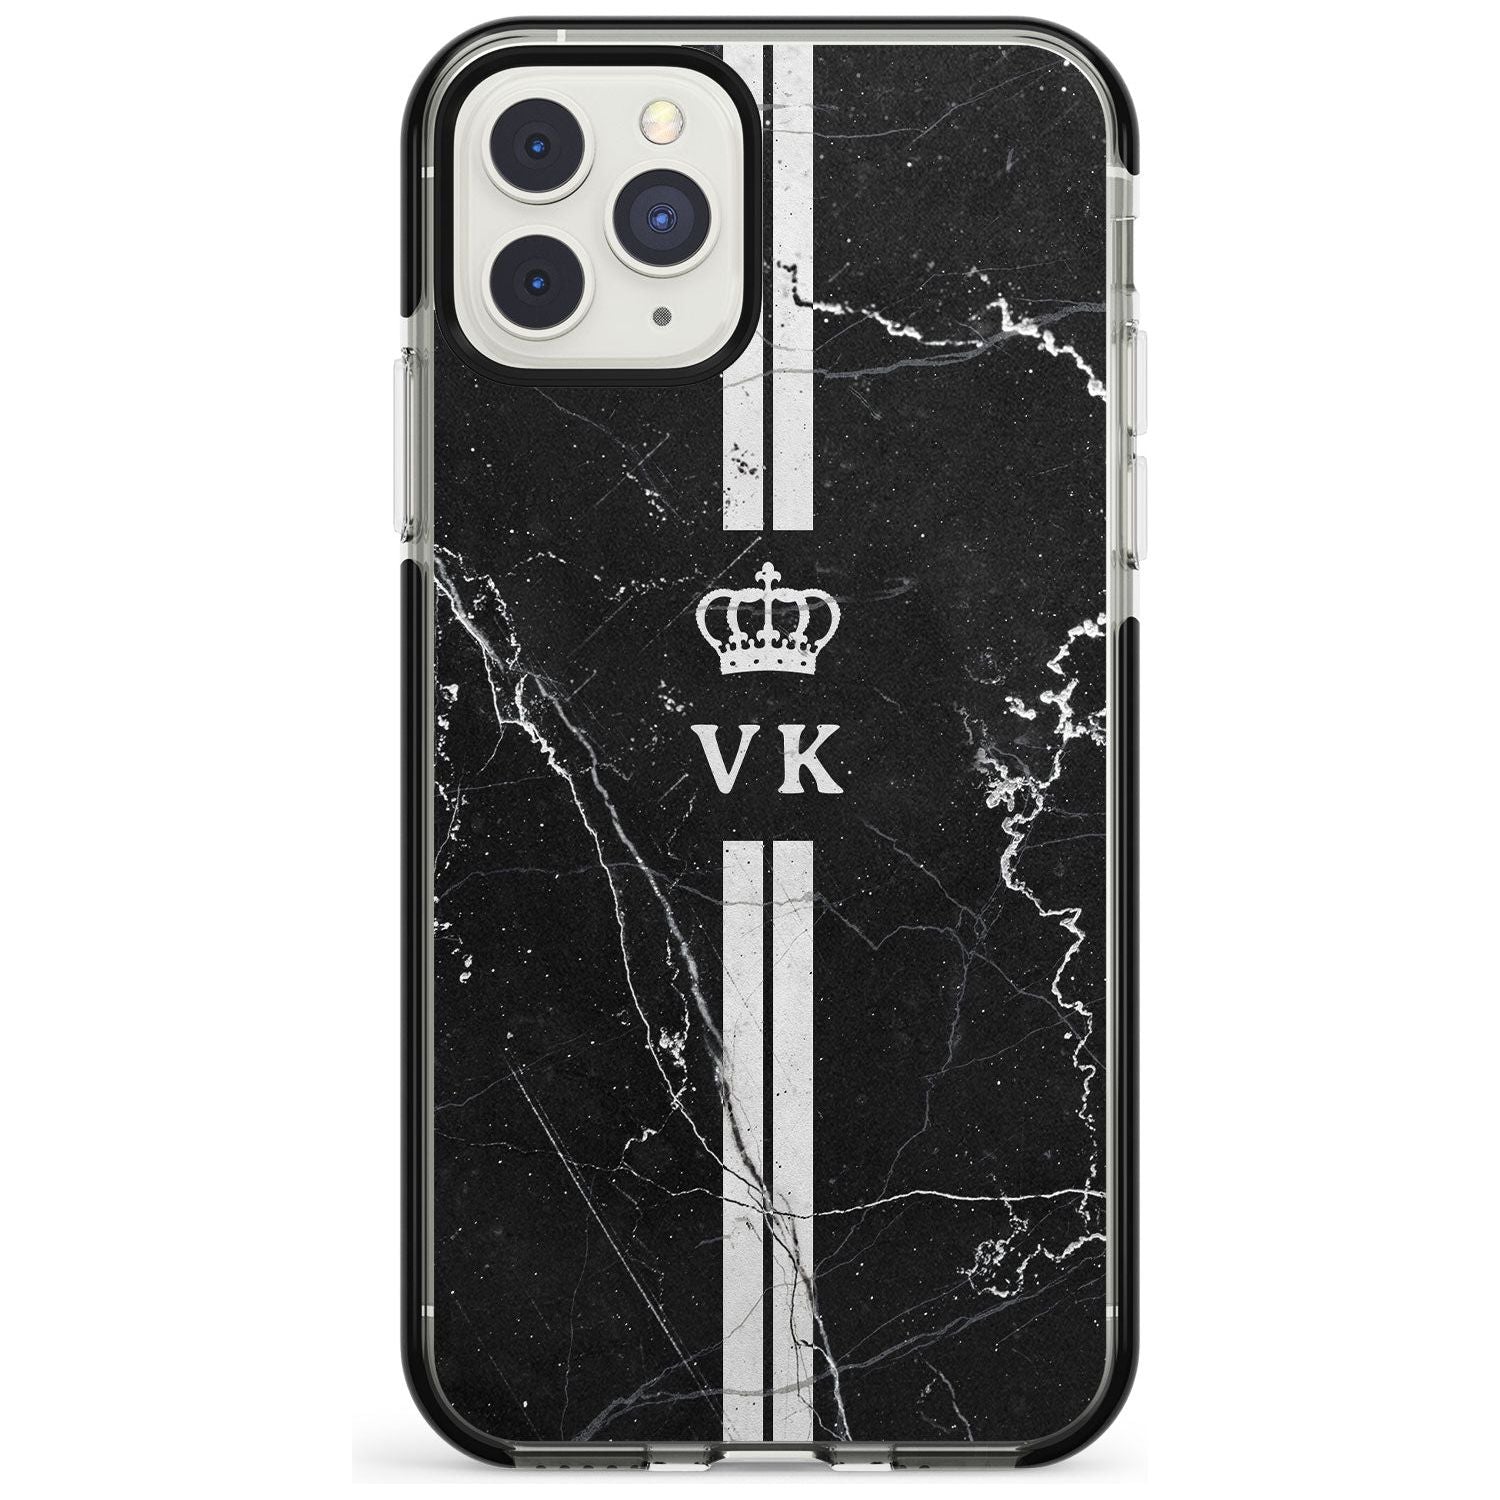 Stripes + Initials with Crown on Black Marble Black Impact Phone Case for iPhone 11 Pro Max